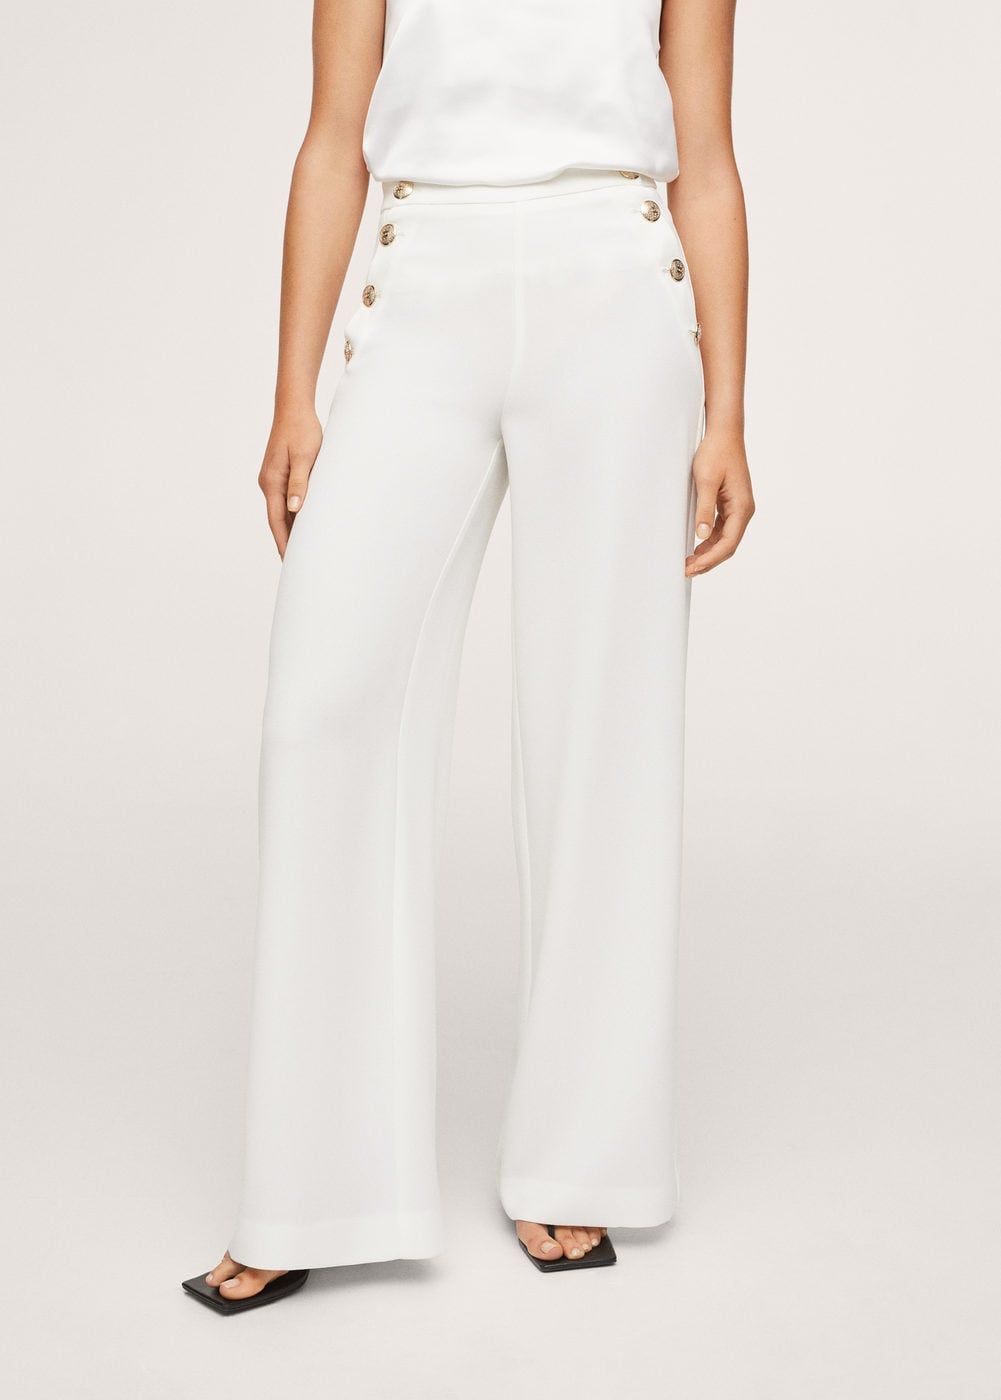 J.Lo Wore This Pant Trend for Date Night With Ben Affleck | Who What Wear